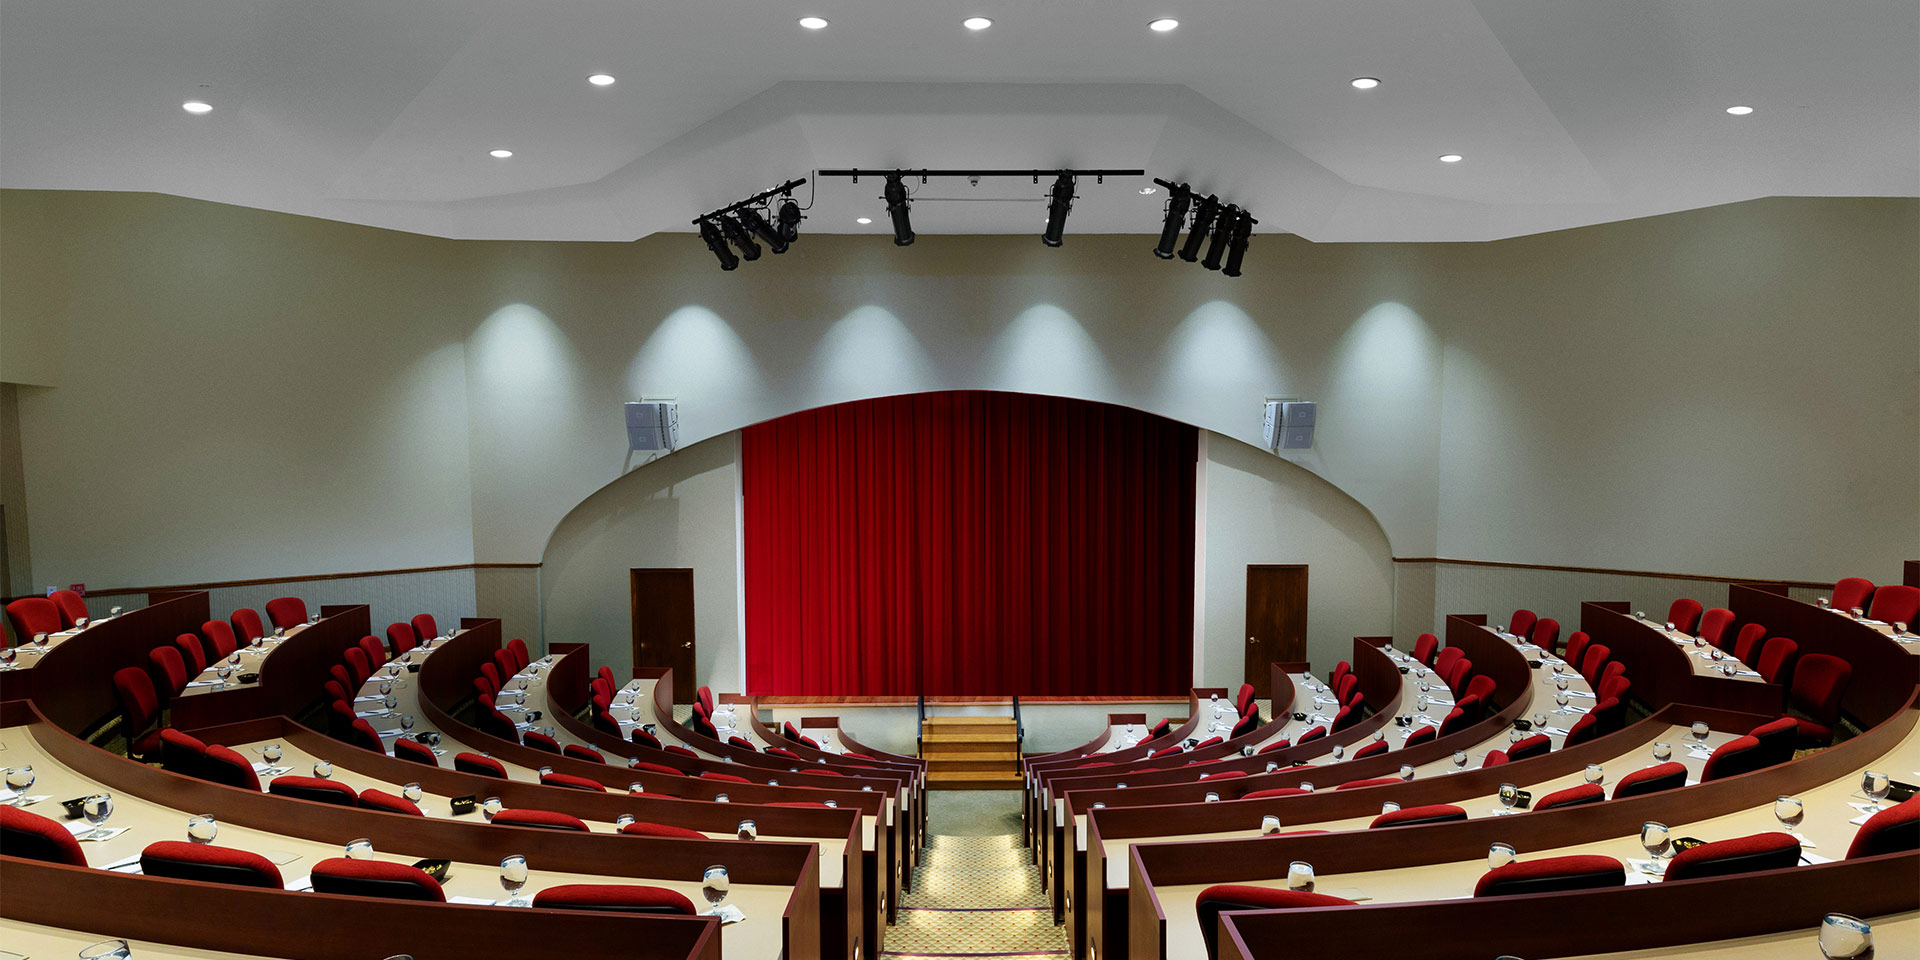 small auditorium with red curtain covering the stage